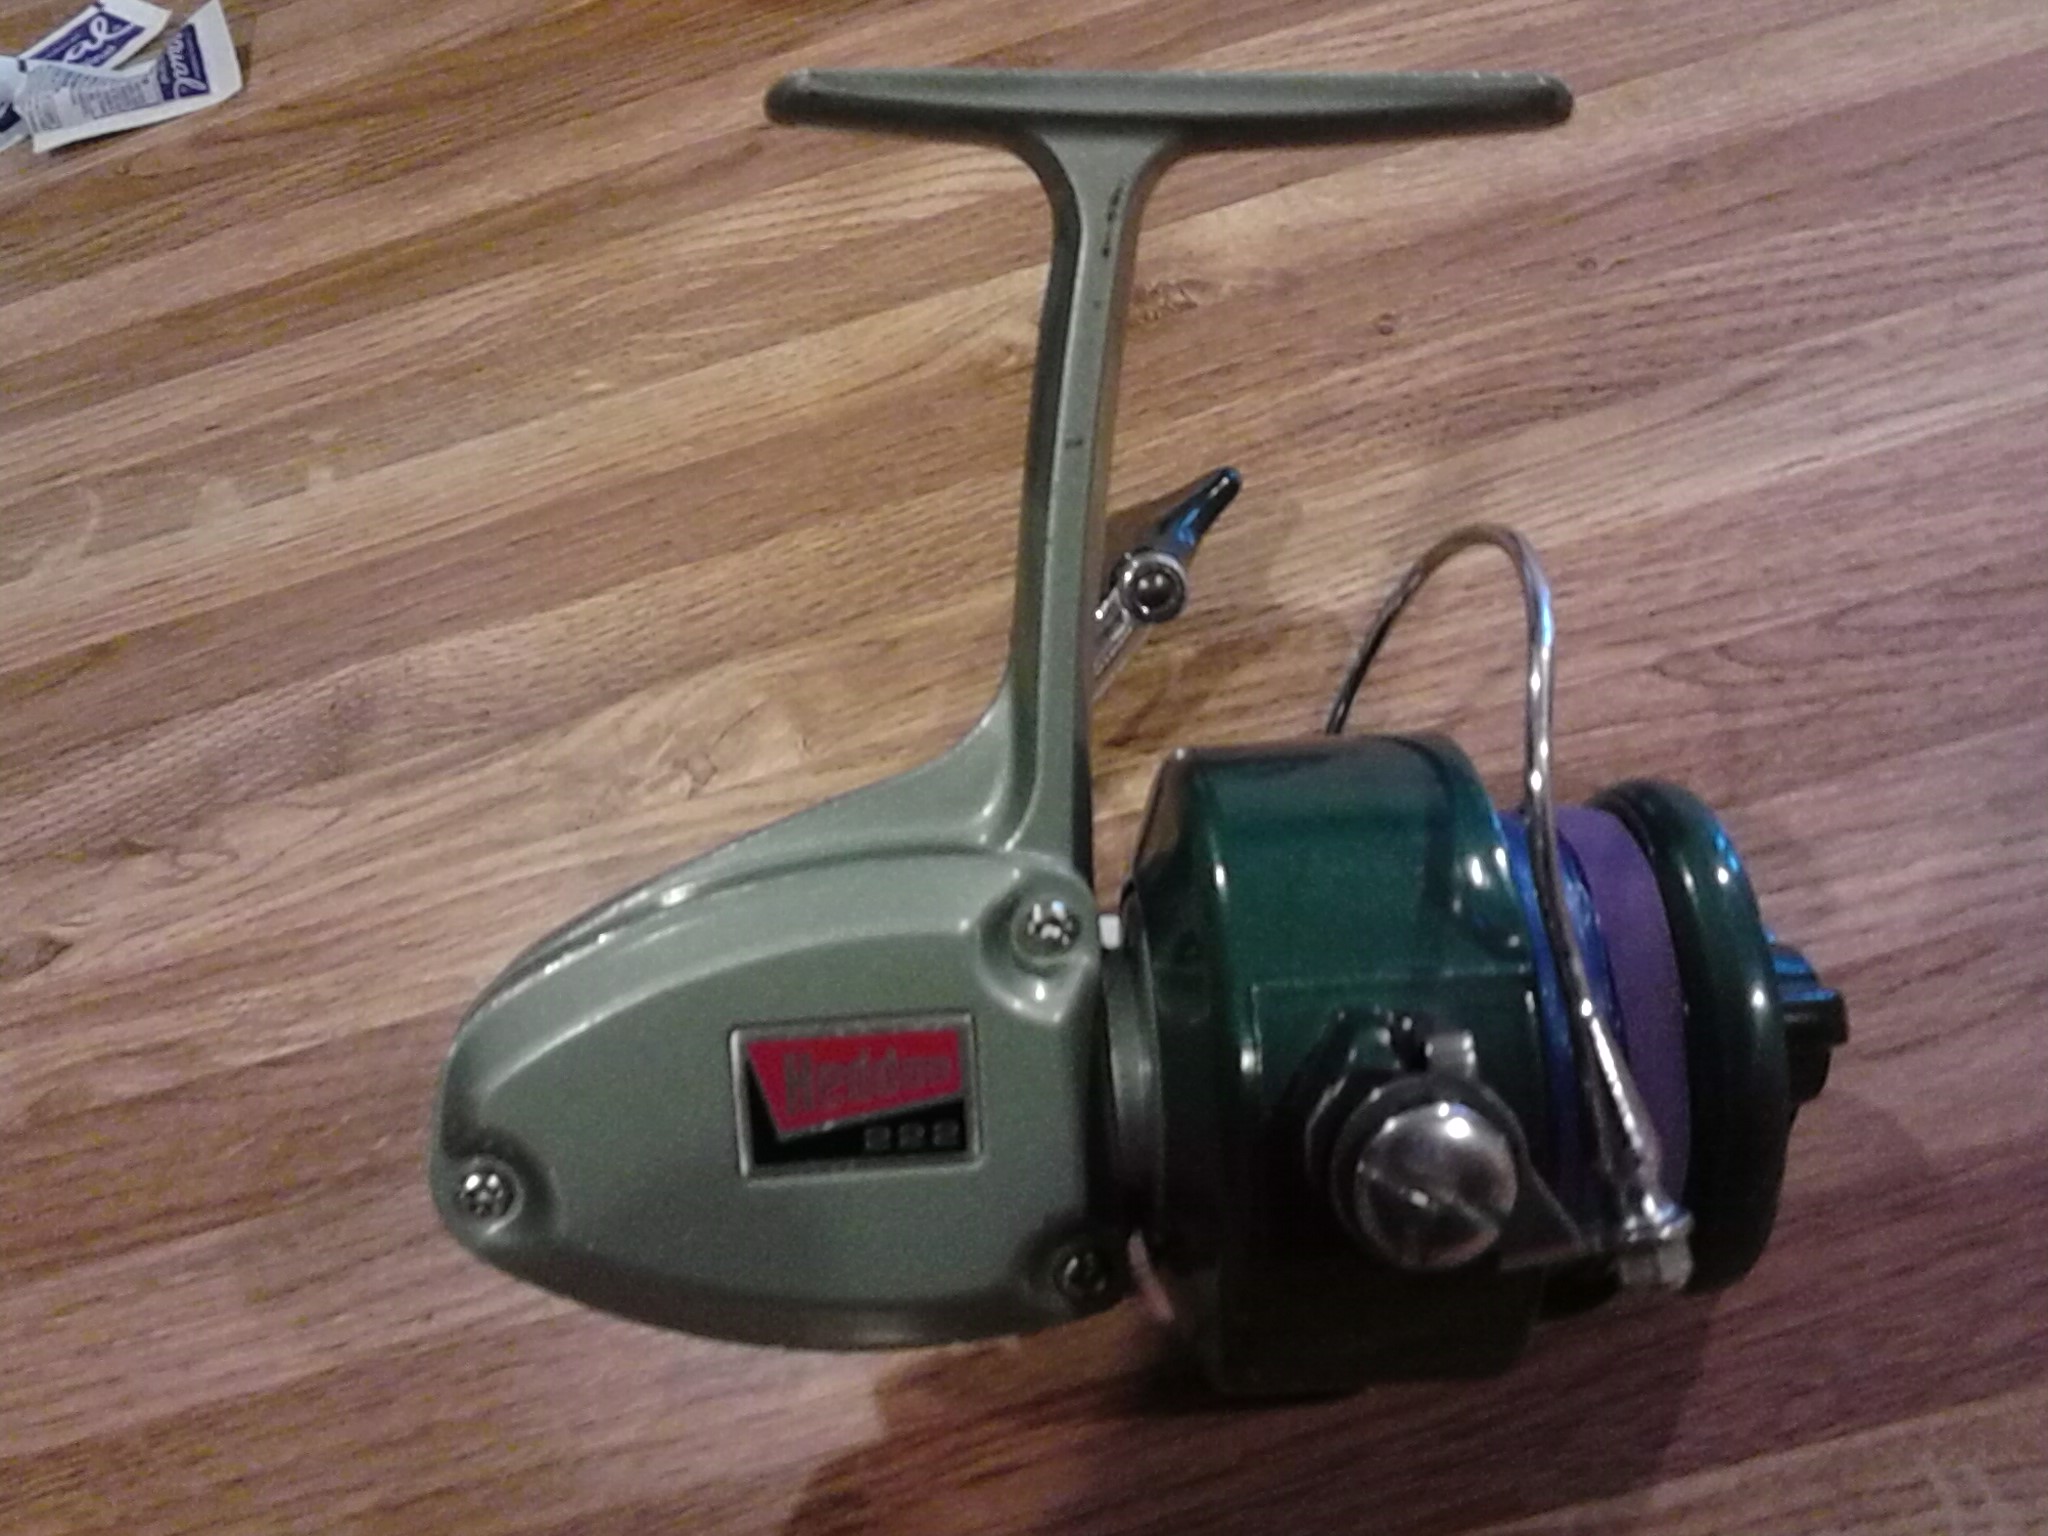 I have this Shakespeare 2499 fishing reel, are these still any good? I  found it in my dads old fishing gear. I havent used it yet, but it seems  like its in